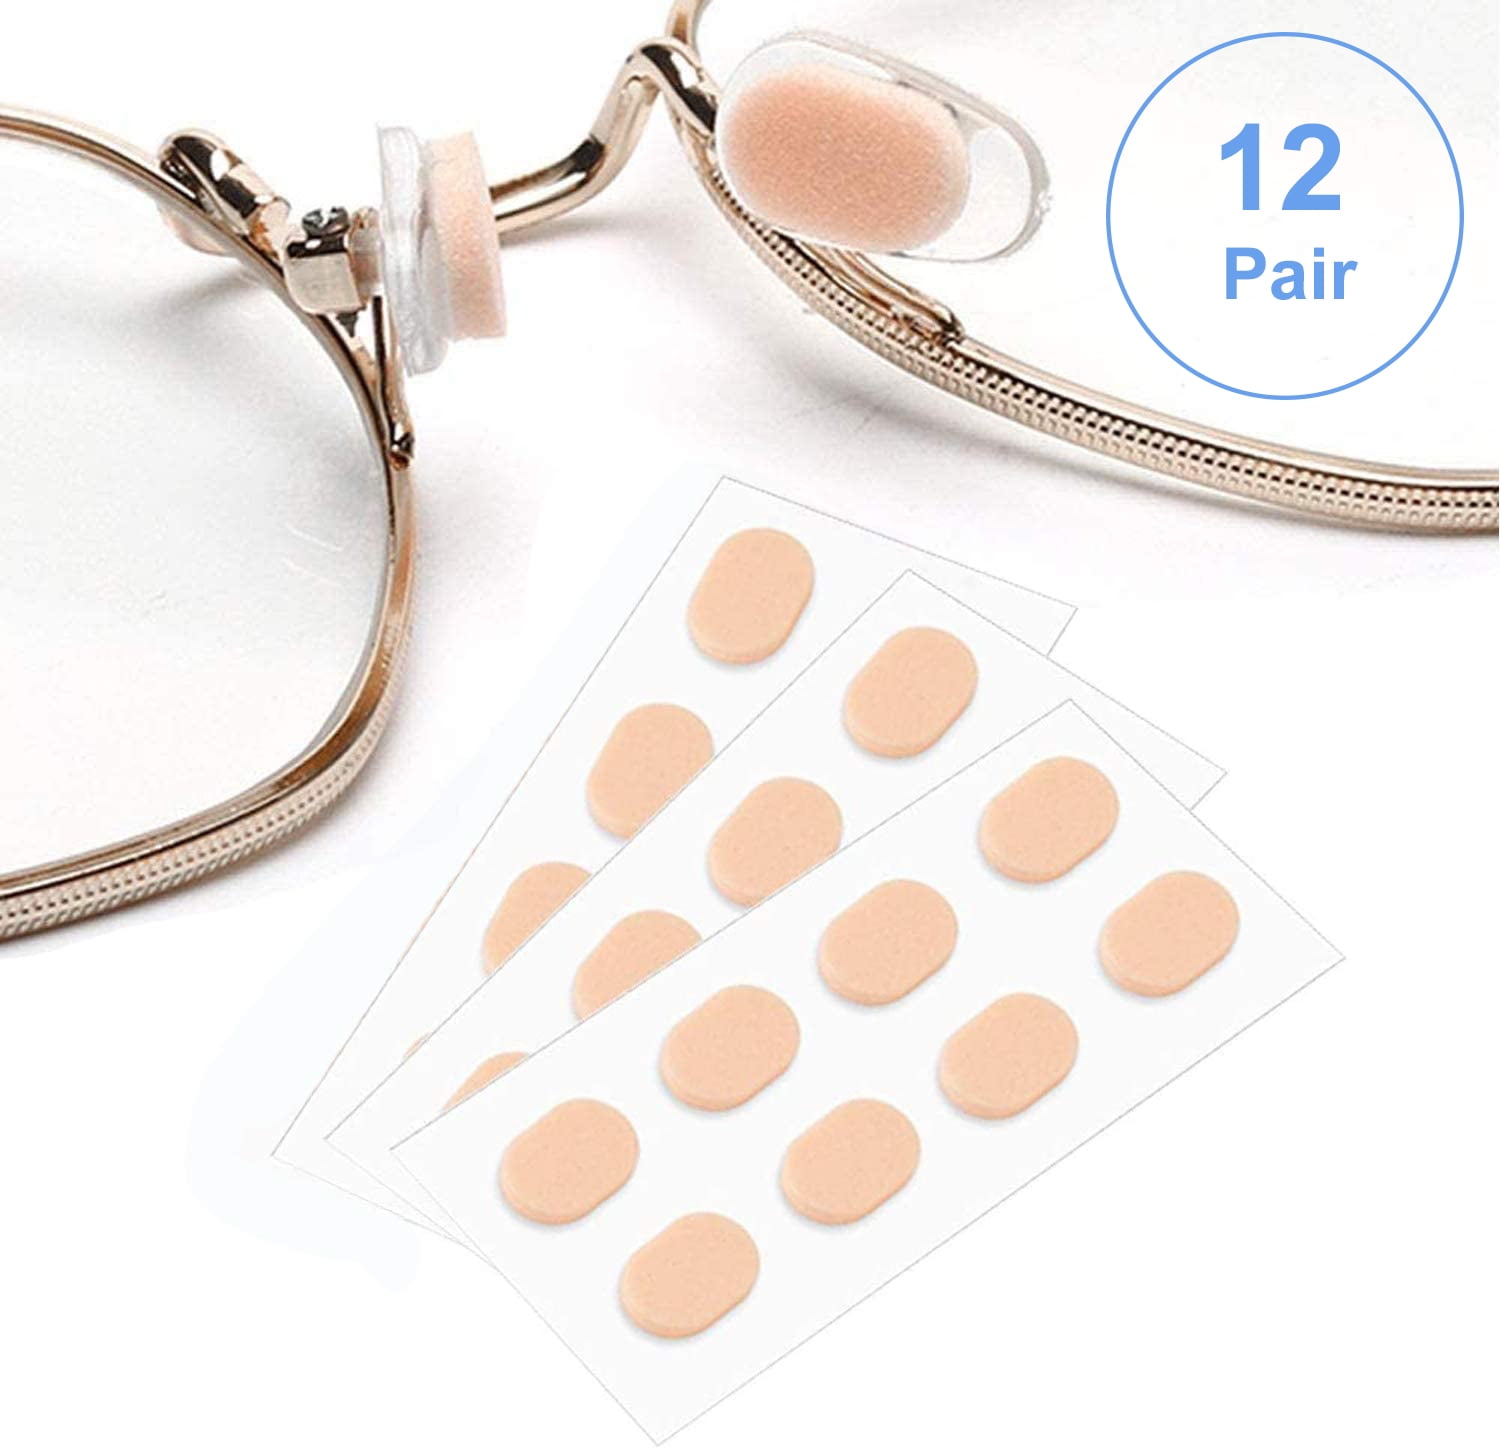 Eyeglass Nose Pads, Adhesive Anti-Slip Nose Pads, Soft Silicone Nose Pad  Cushion for Glasses, Eyeglasses, Sunglasses, 12 Pairs 